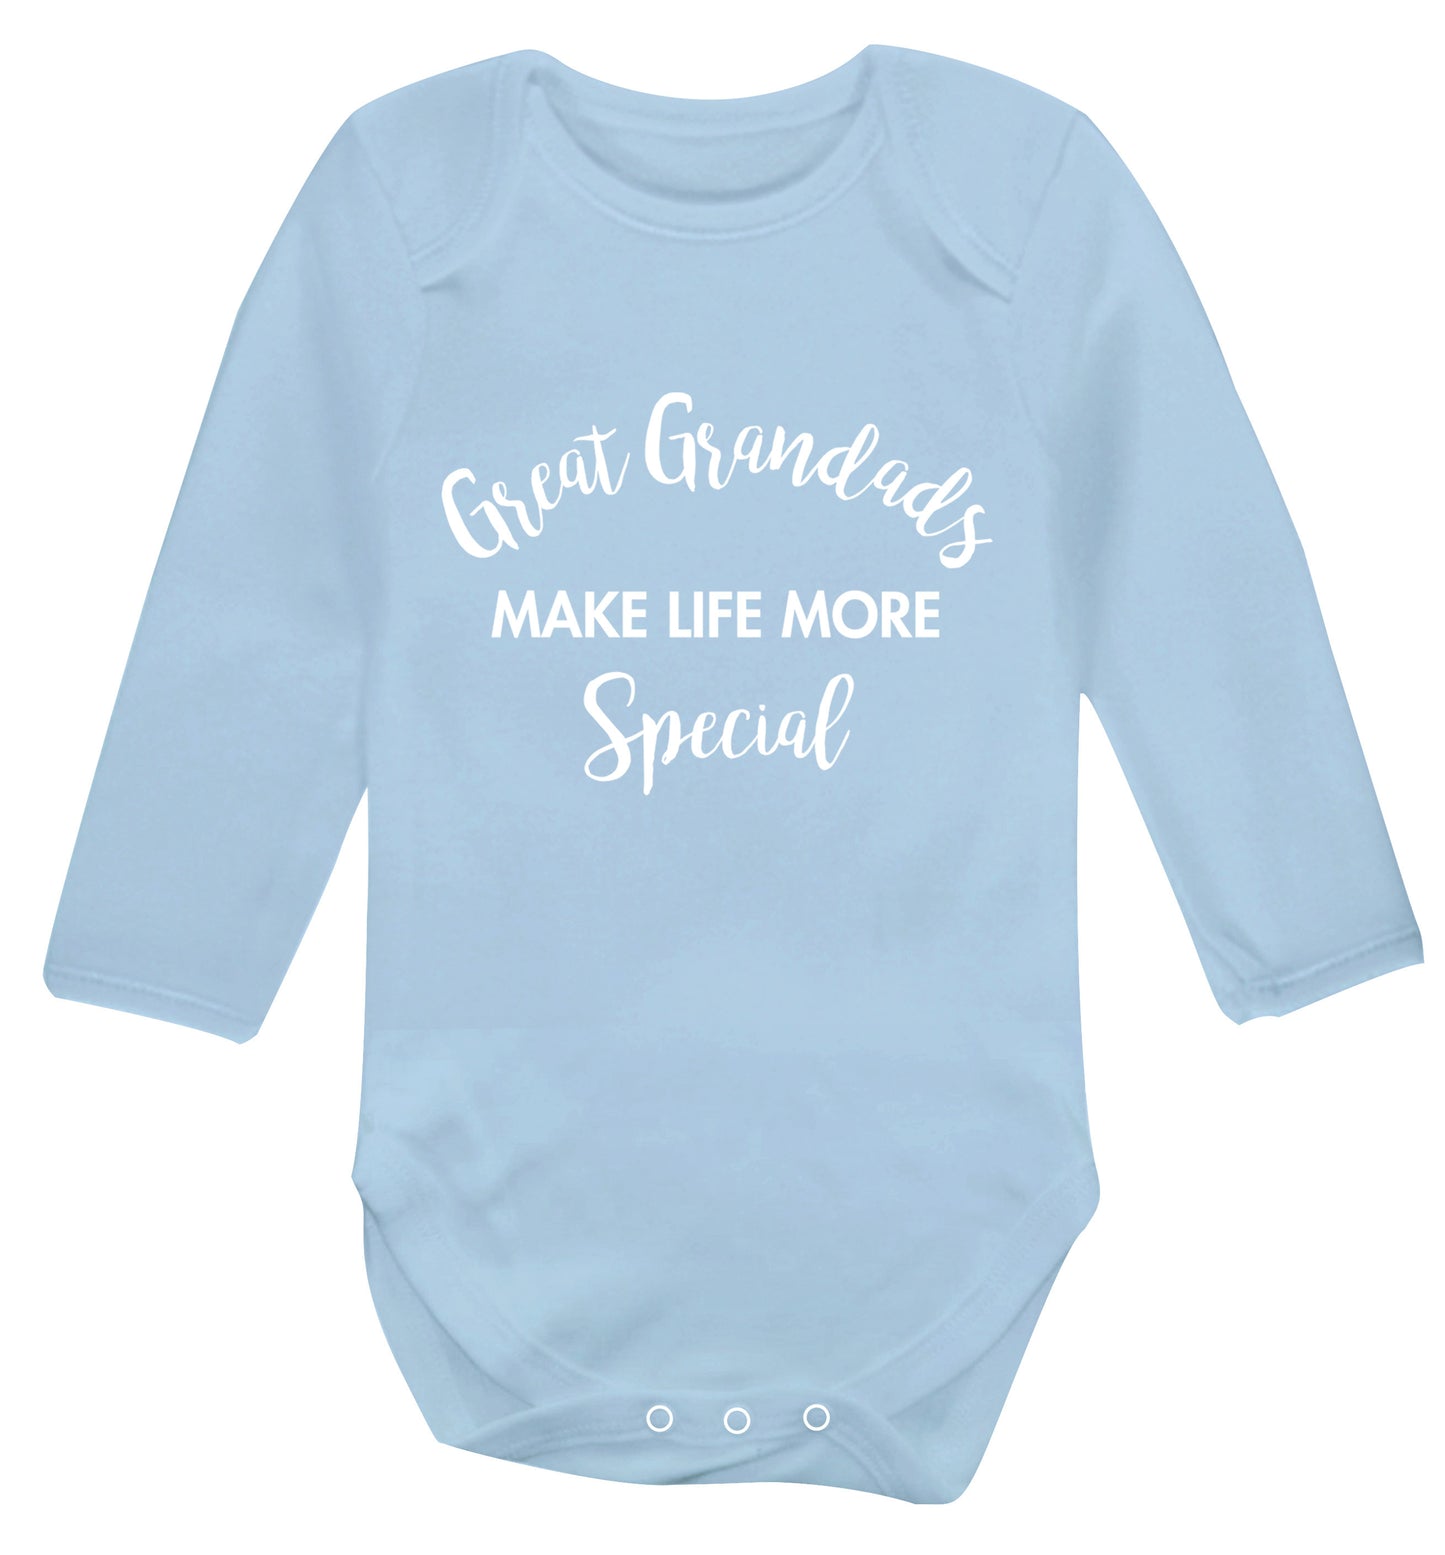 Great Grandads make life more special Baby Vest long sleeved pale blue 6-12 months